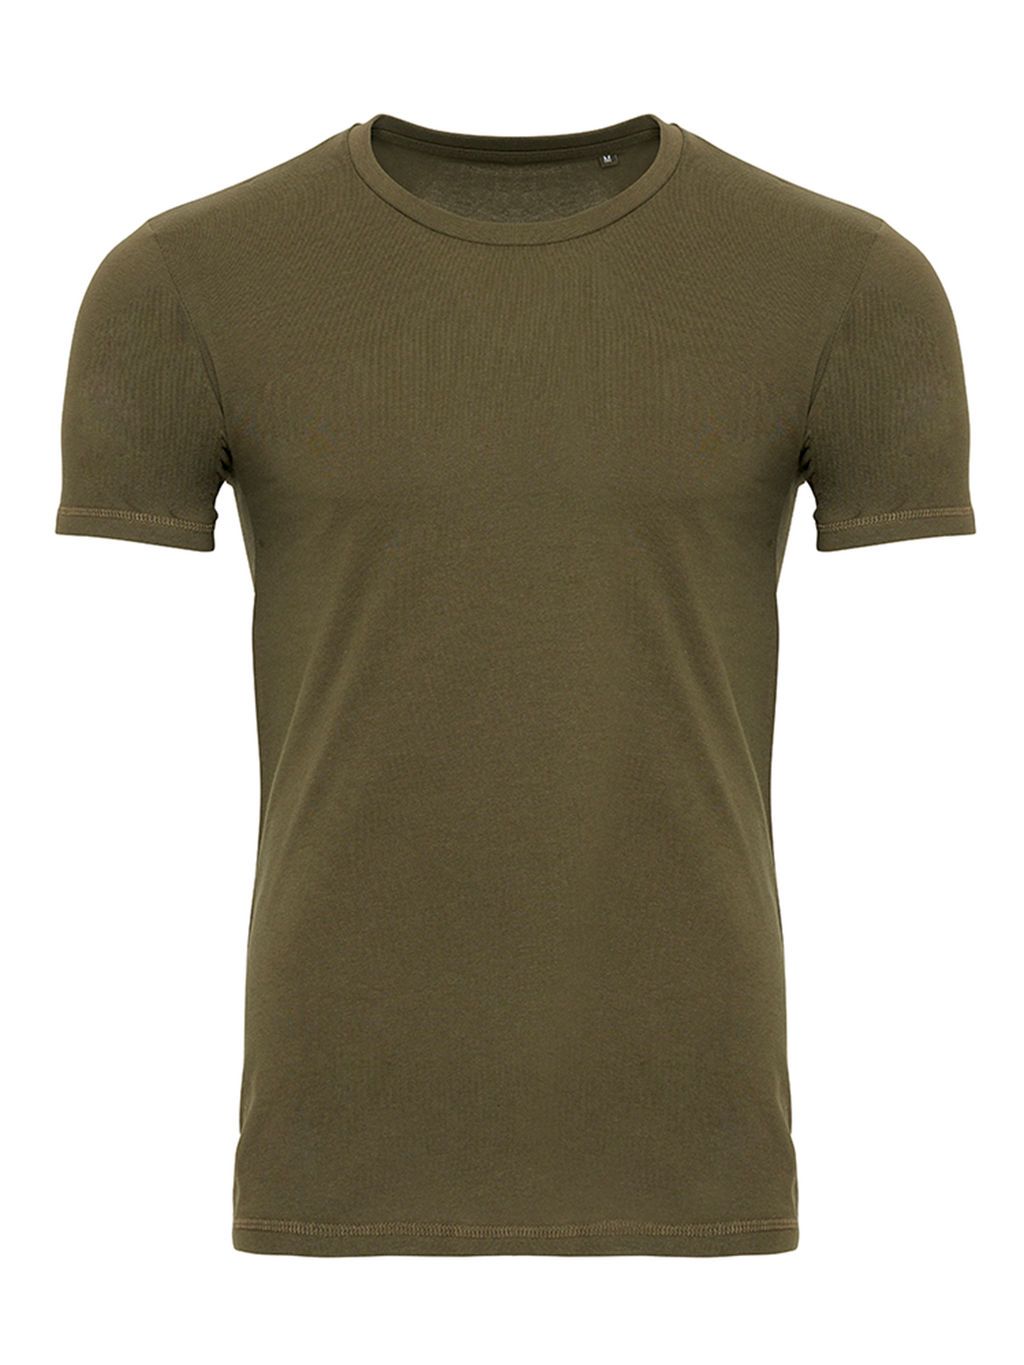 Muscle T-shirt - Army Green